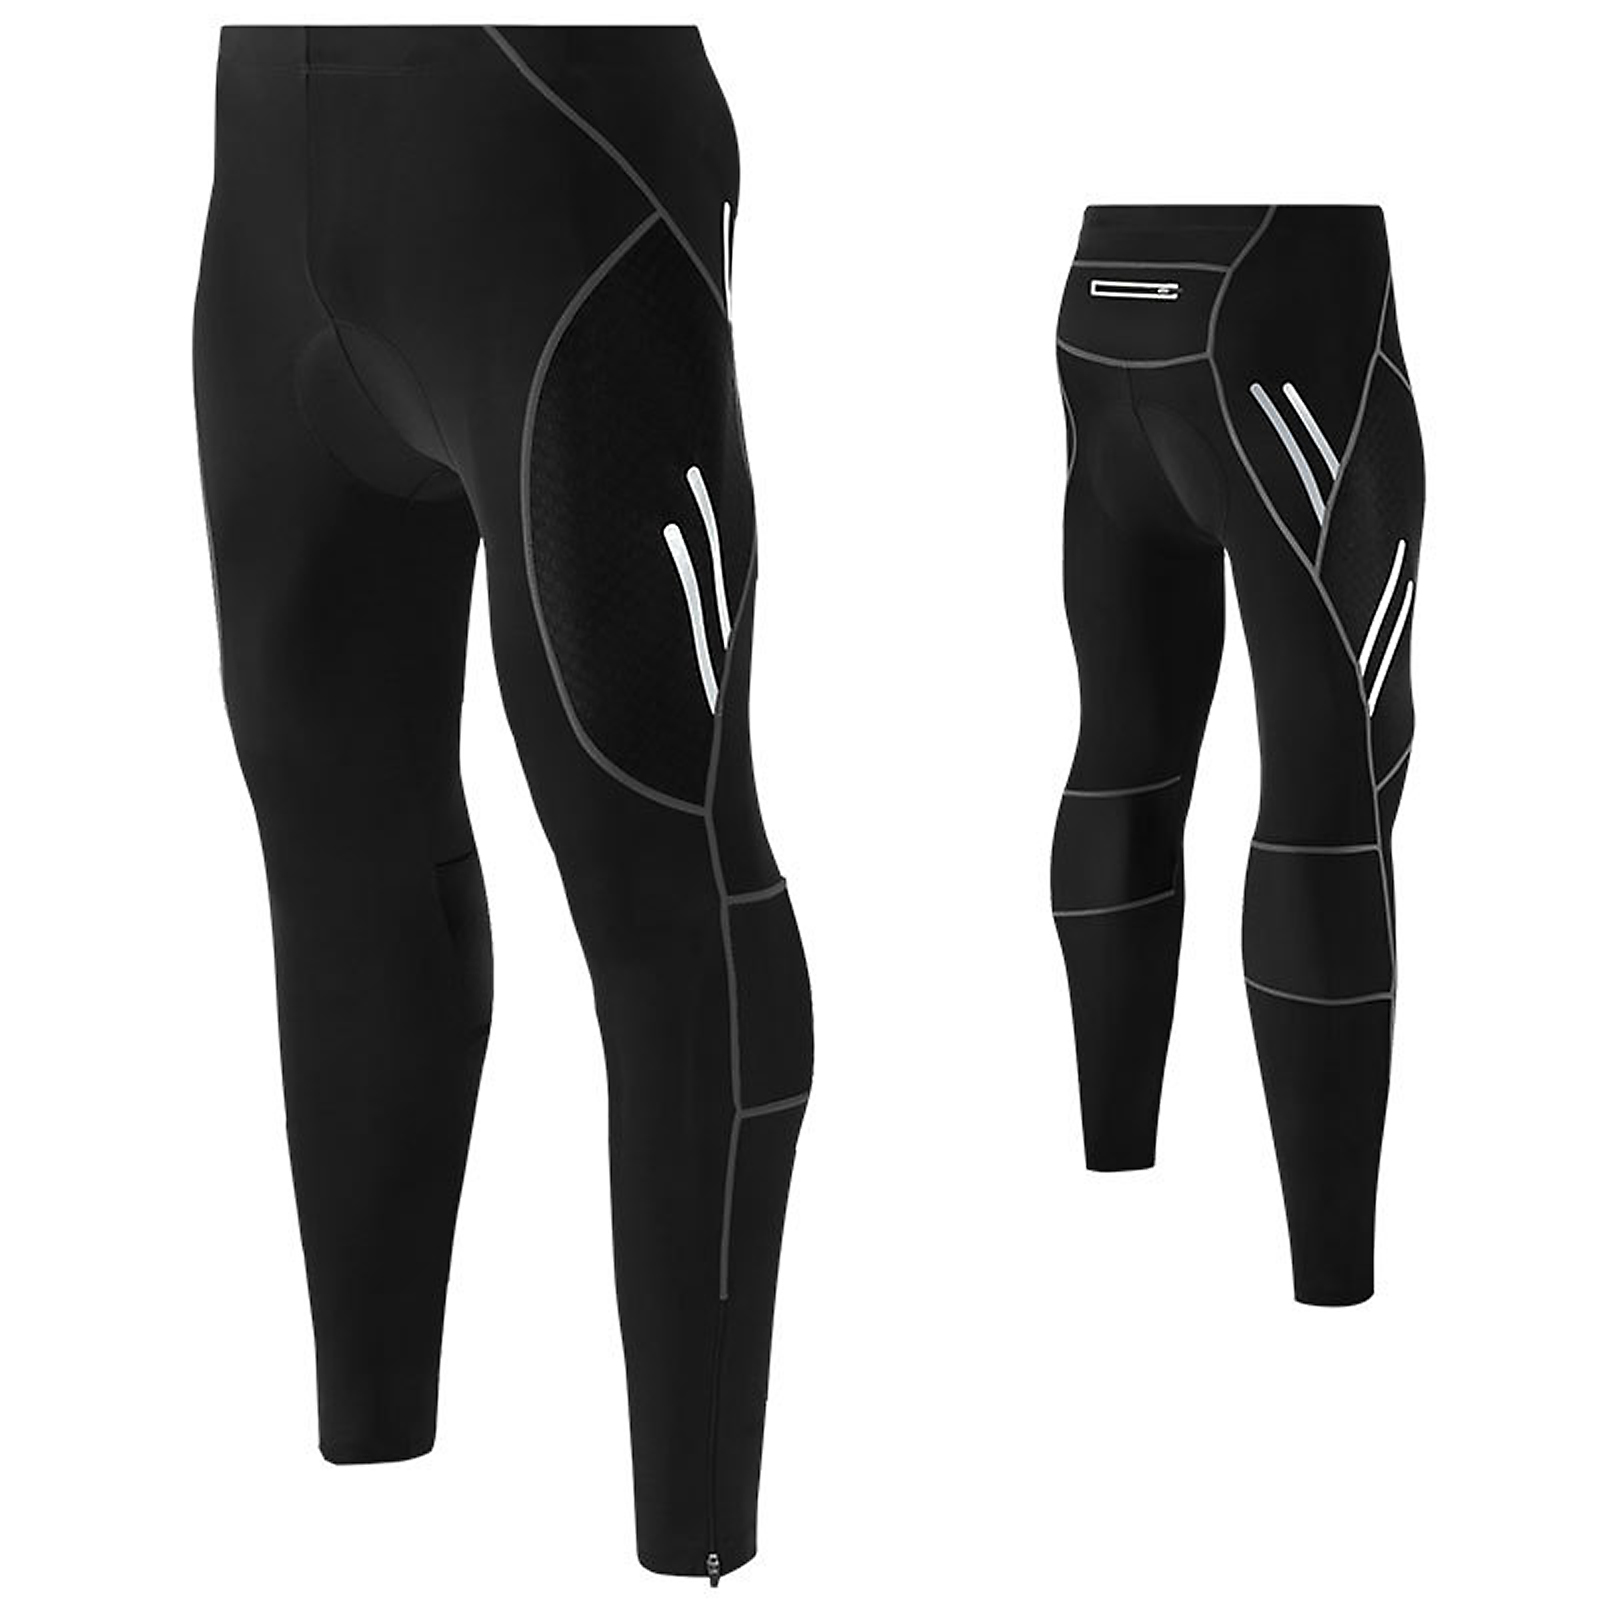 Men's Cycling Tights Pants 4D Padded Bike Pants Compression Classic Series Outdoor Bicycle Leggings Riding Bike Tights 